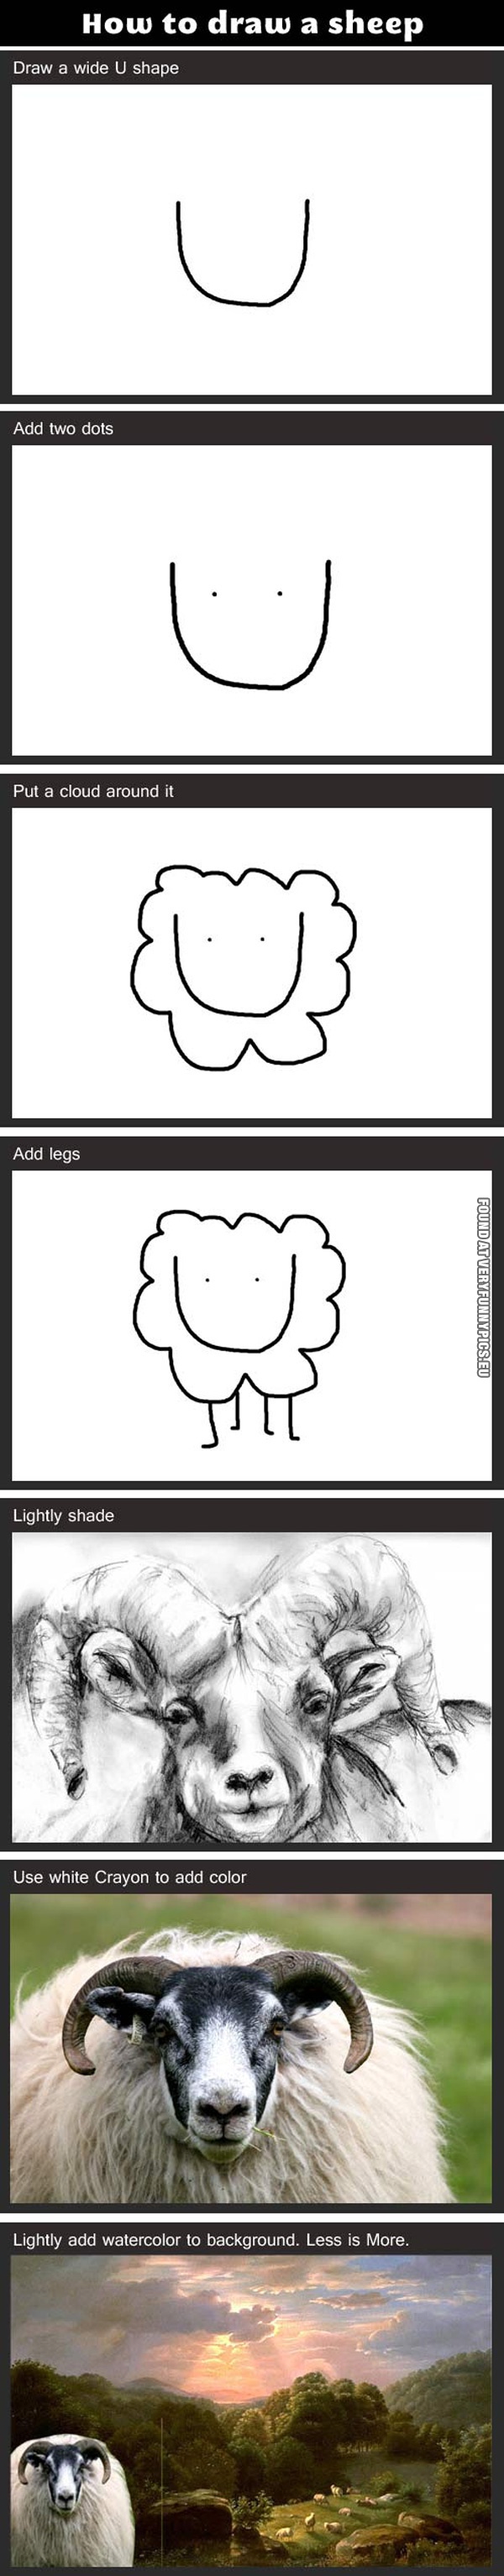 funny-picture-how-to-draw-a-sheep